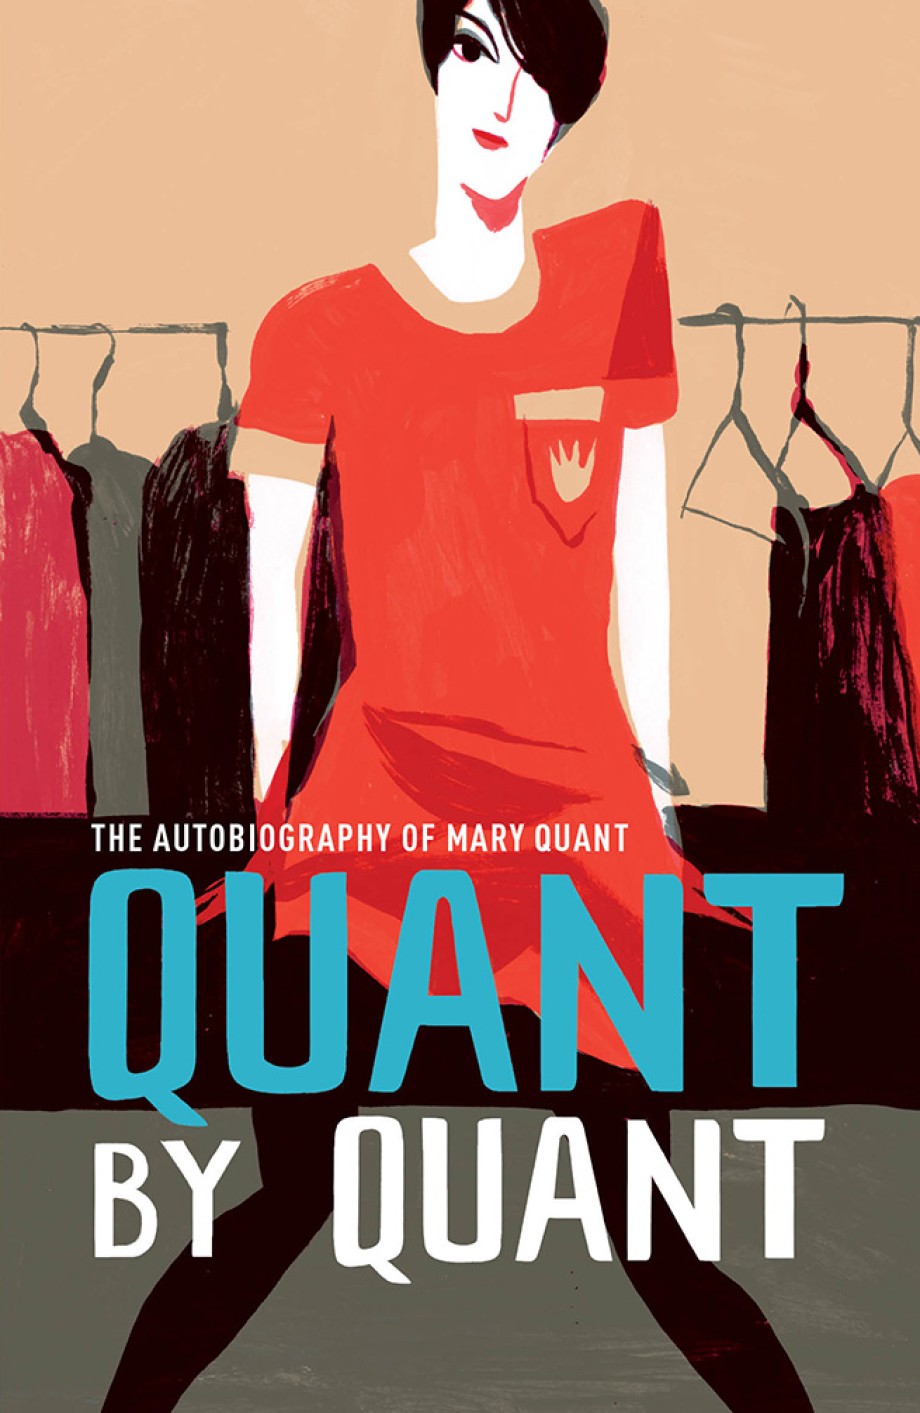 Quant by Quant The Autobiography of Mary Quant